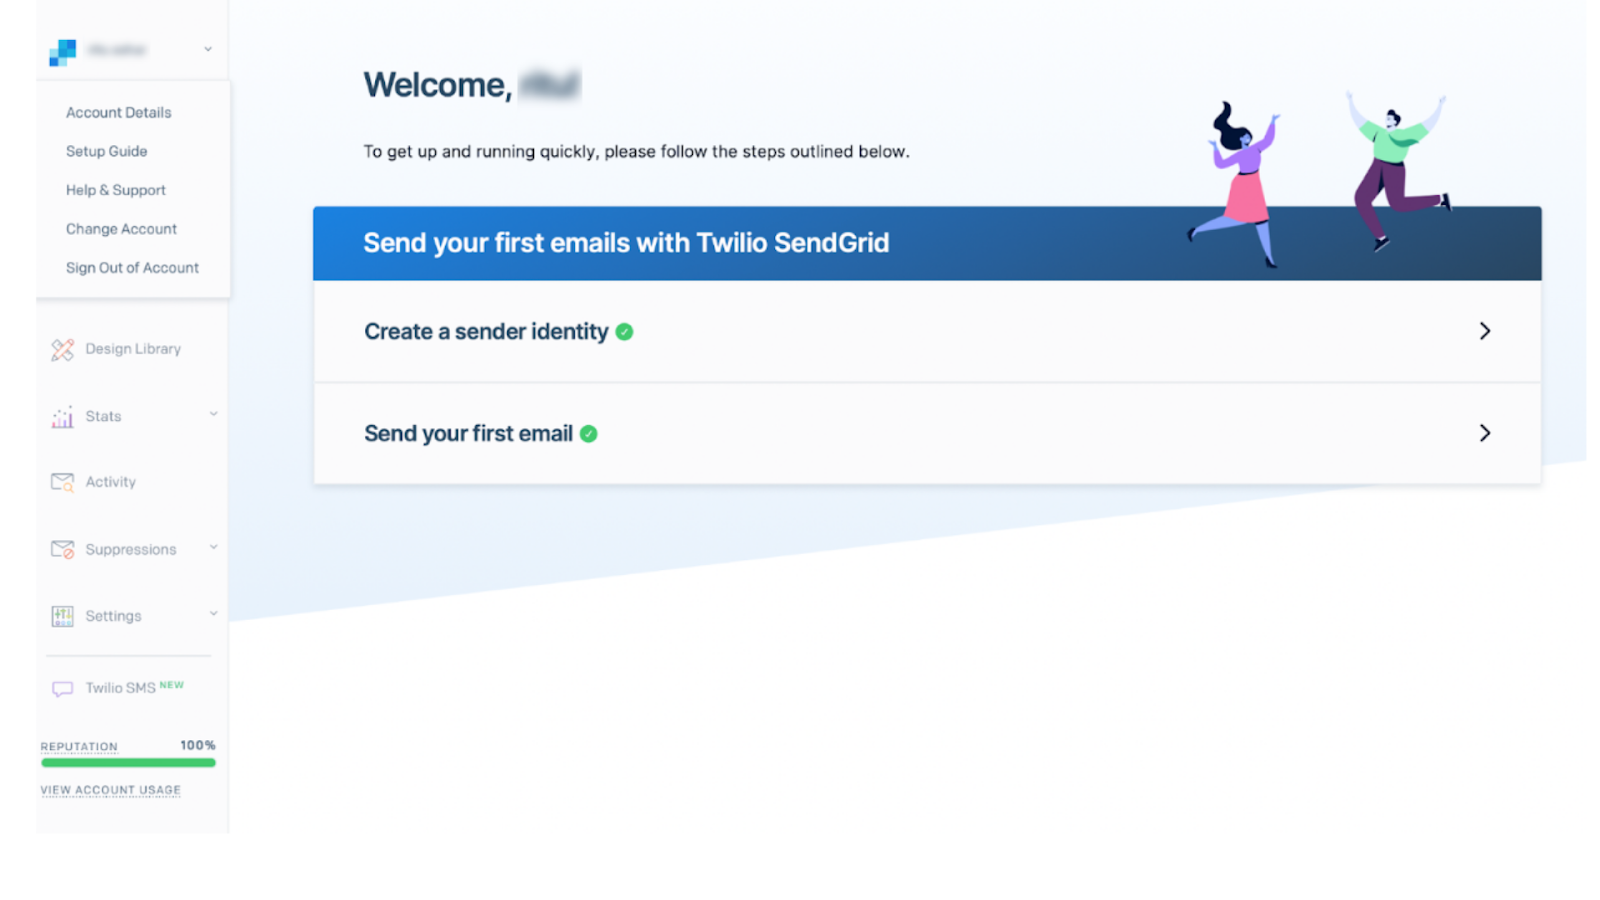 How to send customized emails by integrating SendGrid with a Node.js application?